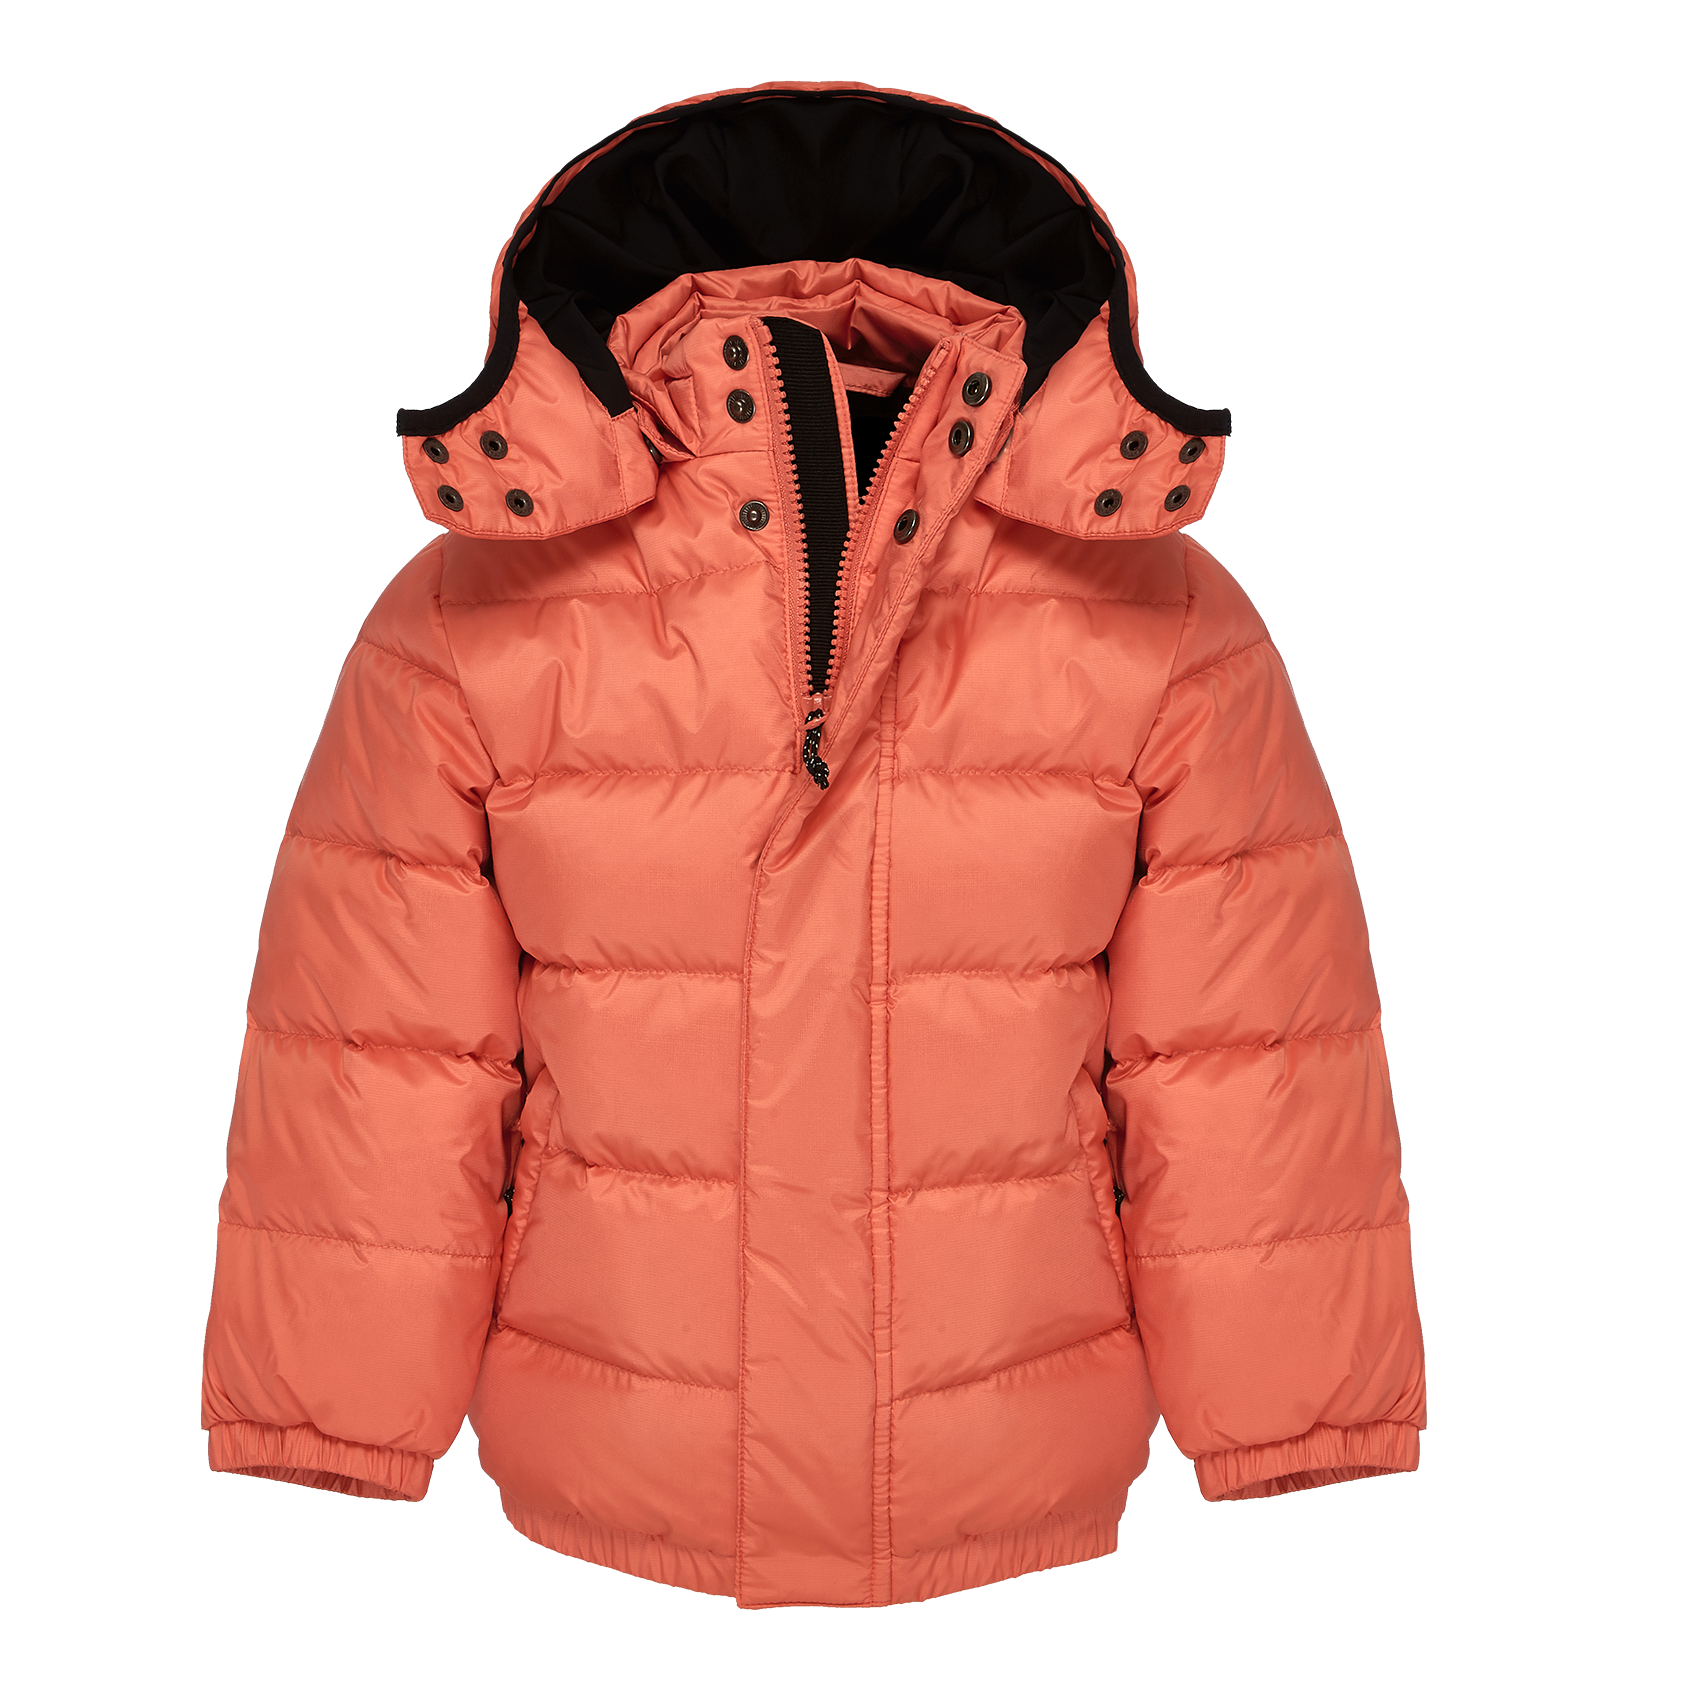 Wear Fashion :: Kids :: Jackets & :: Cintamani Iceland Ljon puffy down jacket for filled with quality duck down. - Products